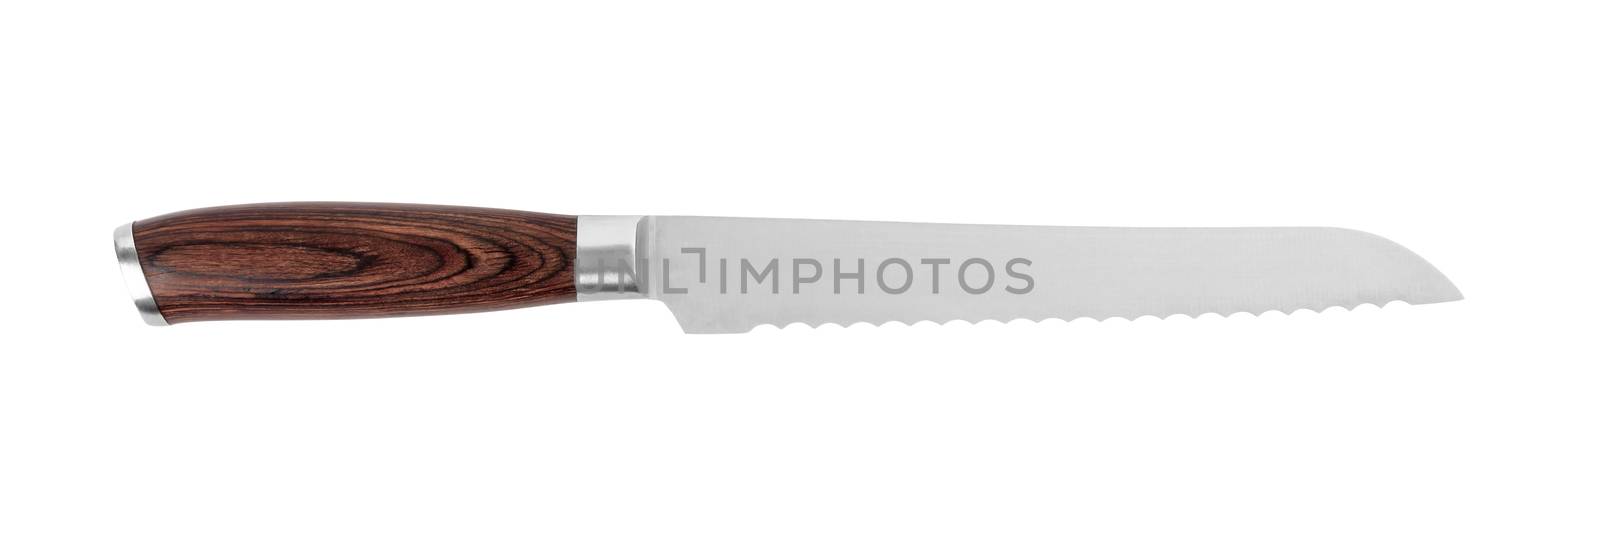 Bread knife isolated on white background with clipping path